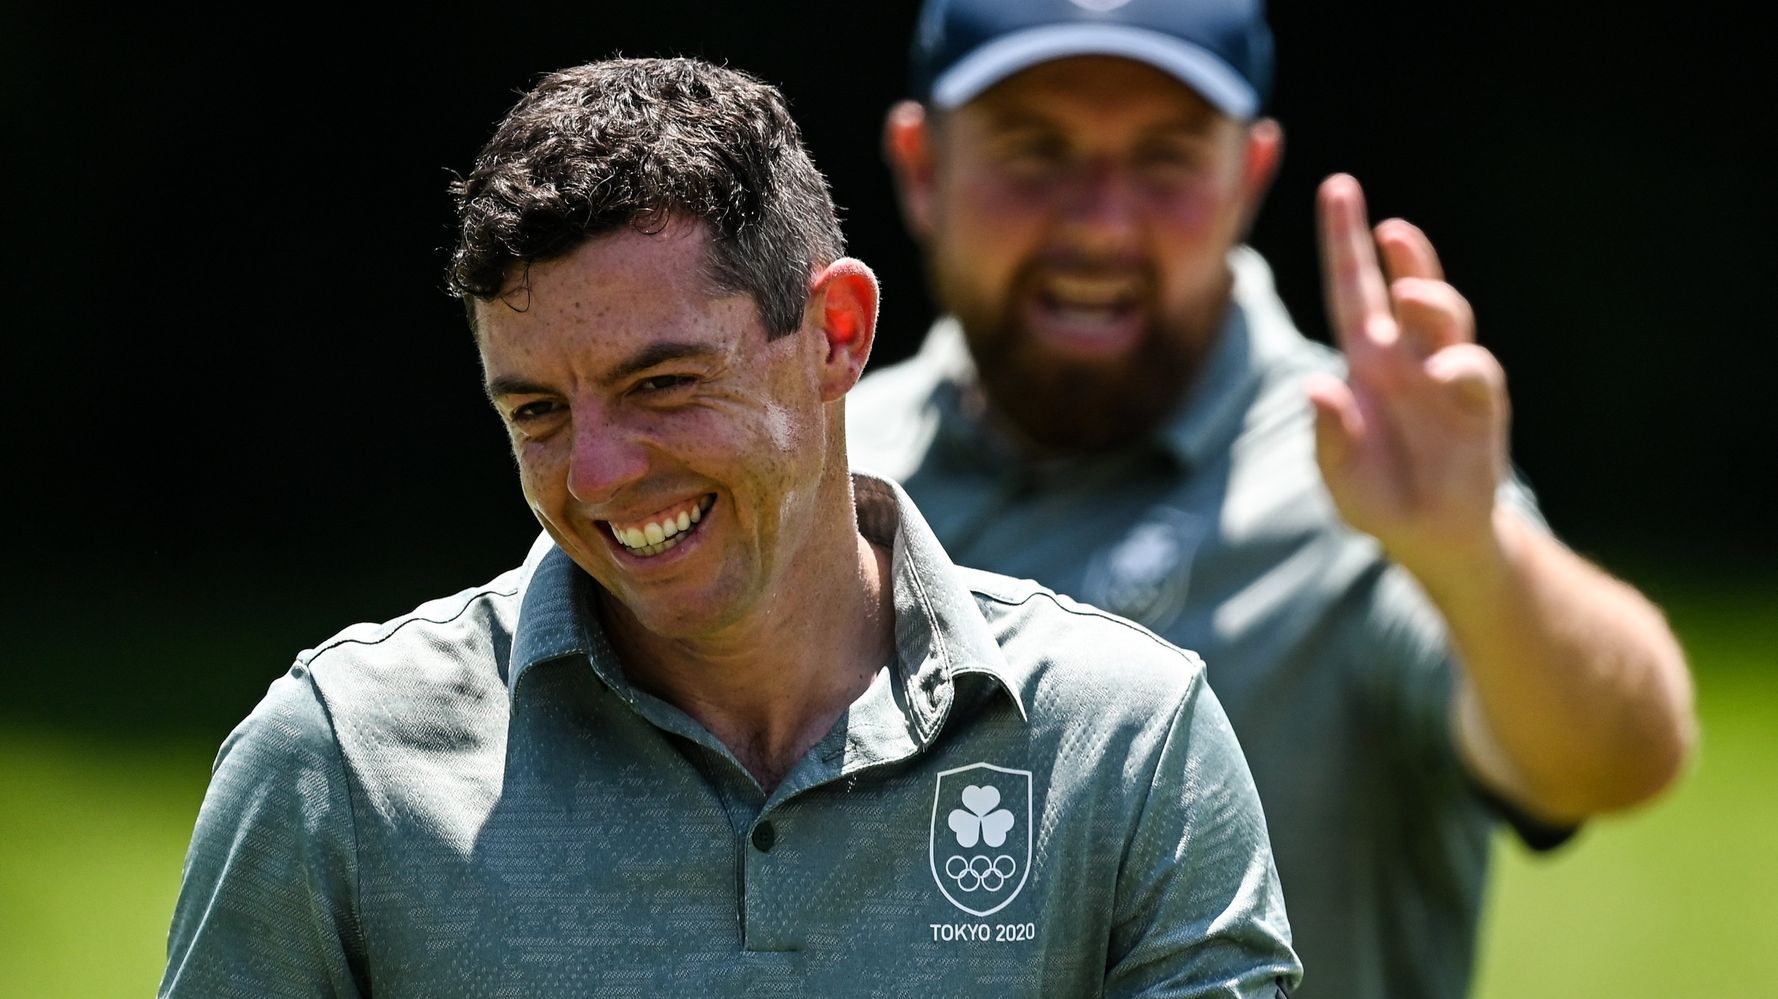 Rory McIlroy Reveals Why He Won't Wear A Hat At The Tokyo Olympics